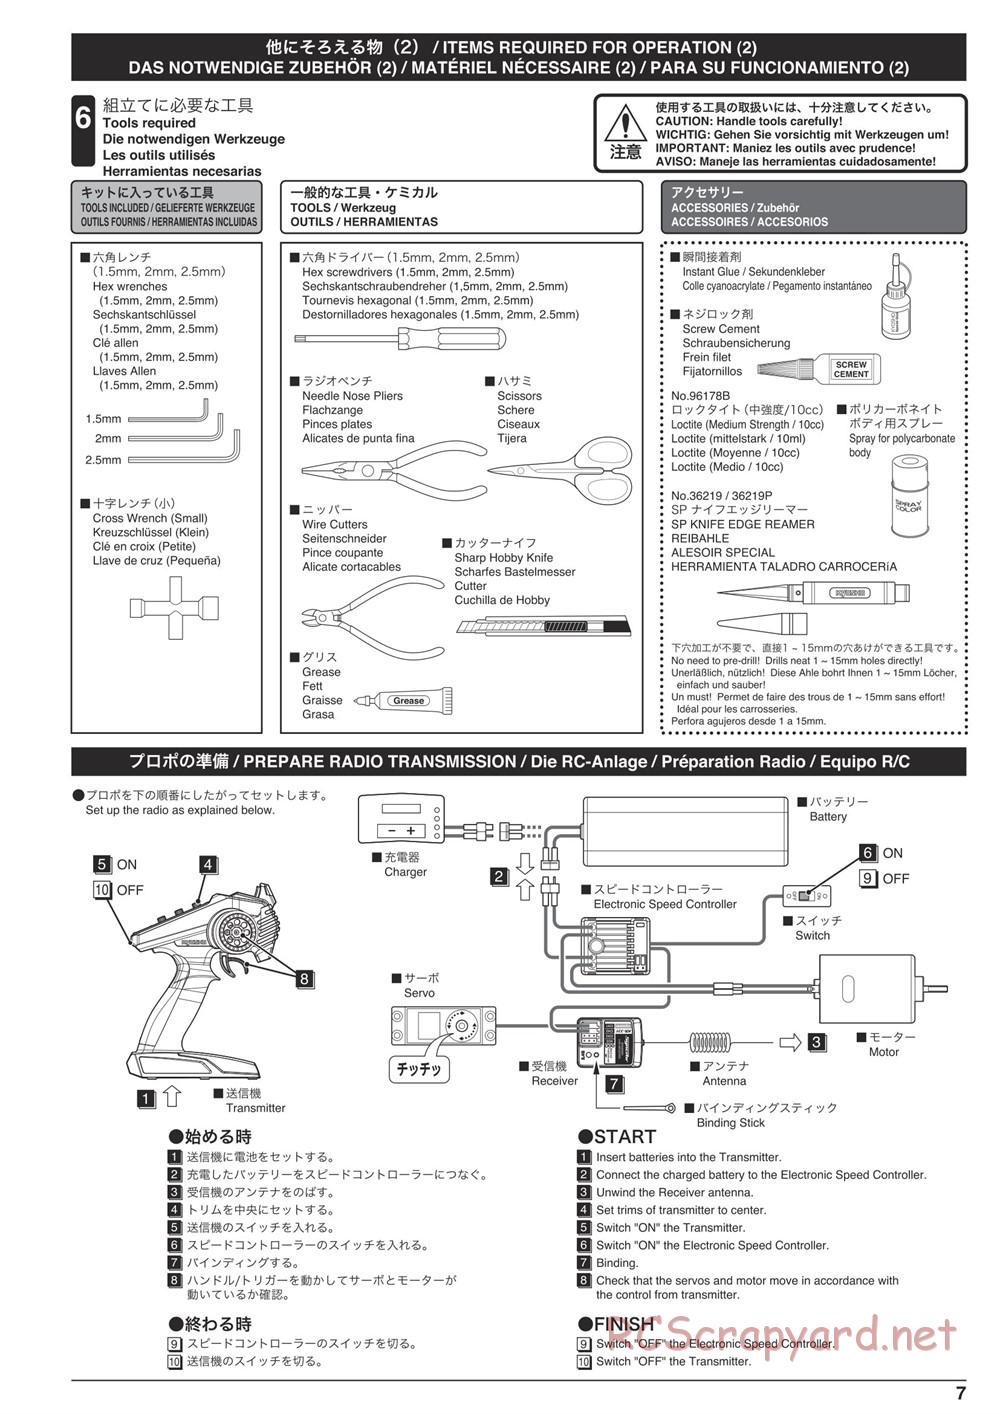 Kyosho - Outlaw Rampage Pro - Manual - Page 7